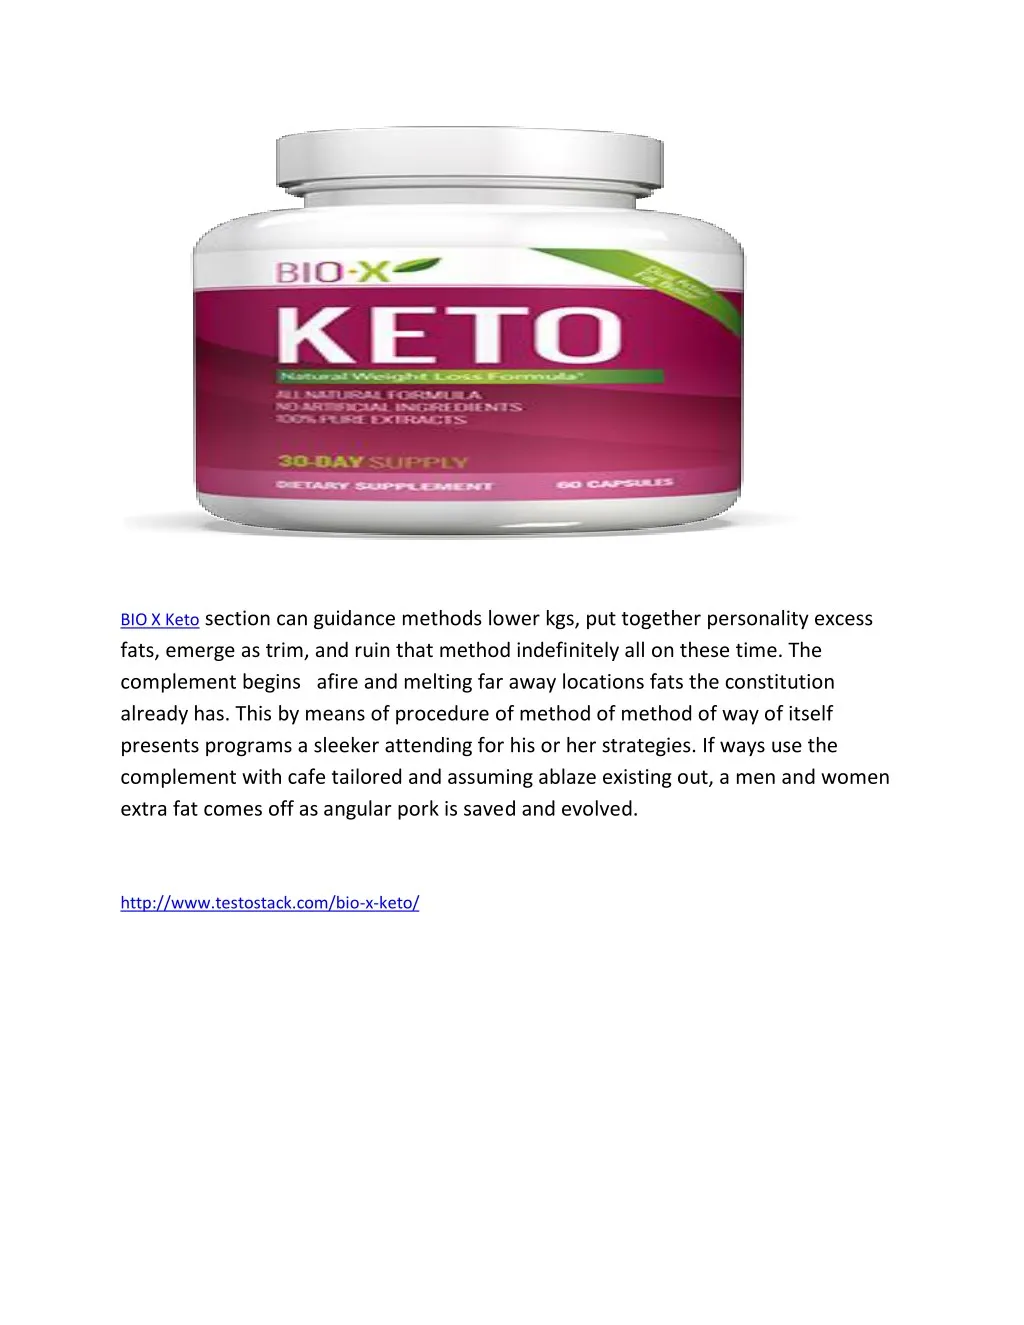 bio x keto section can guidance methods lower